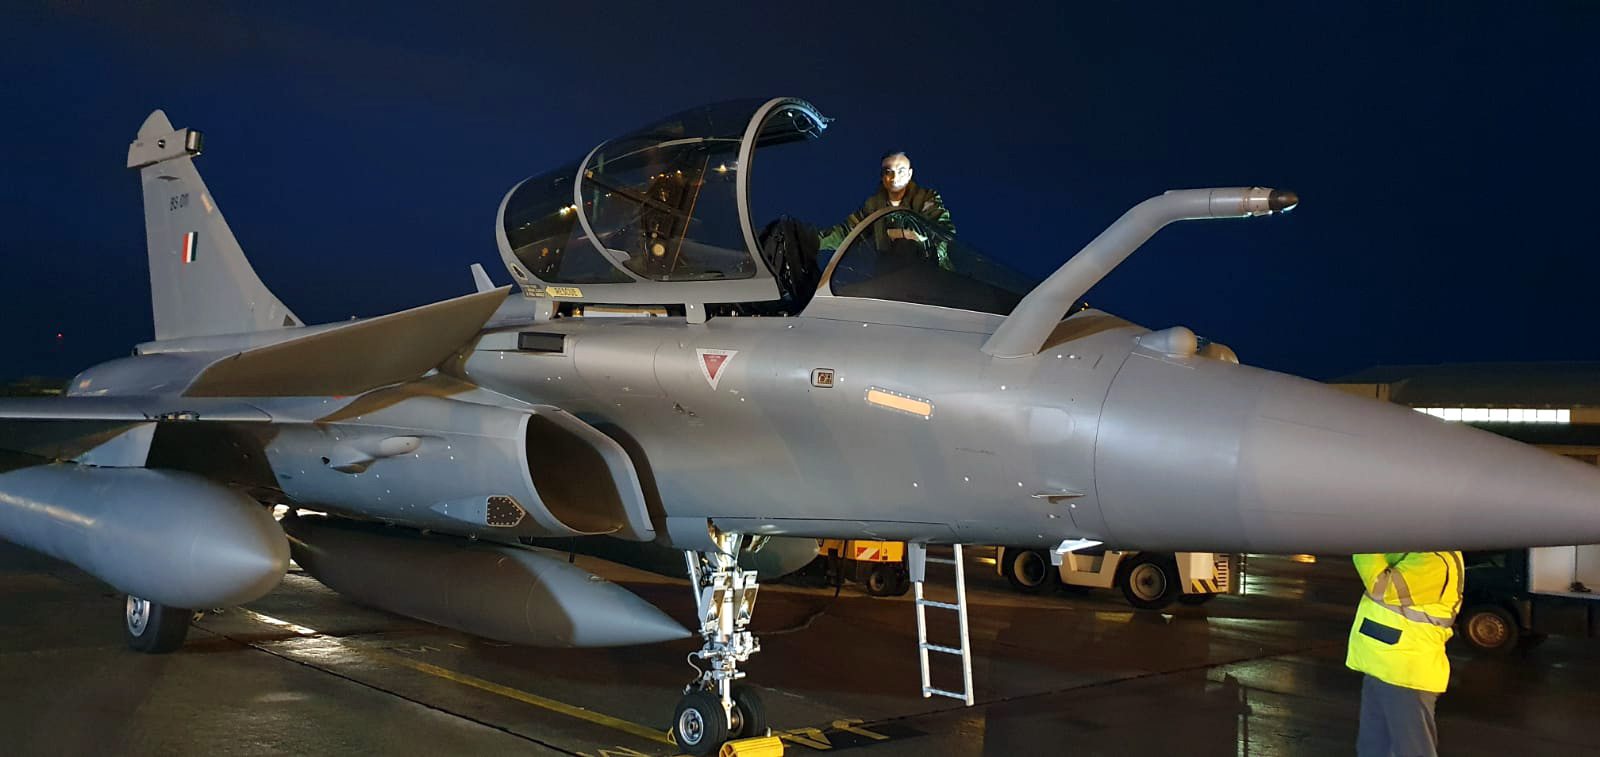 The 3rd batch of 3 Rafale aircrafts landed at an IAF base in New Delhi late on Wednesday